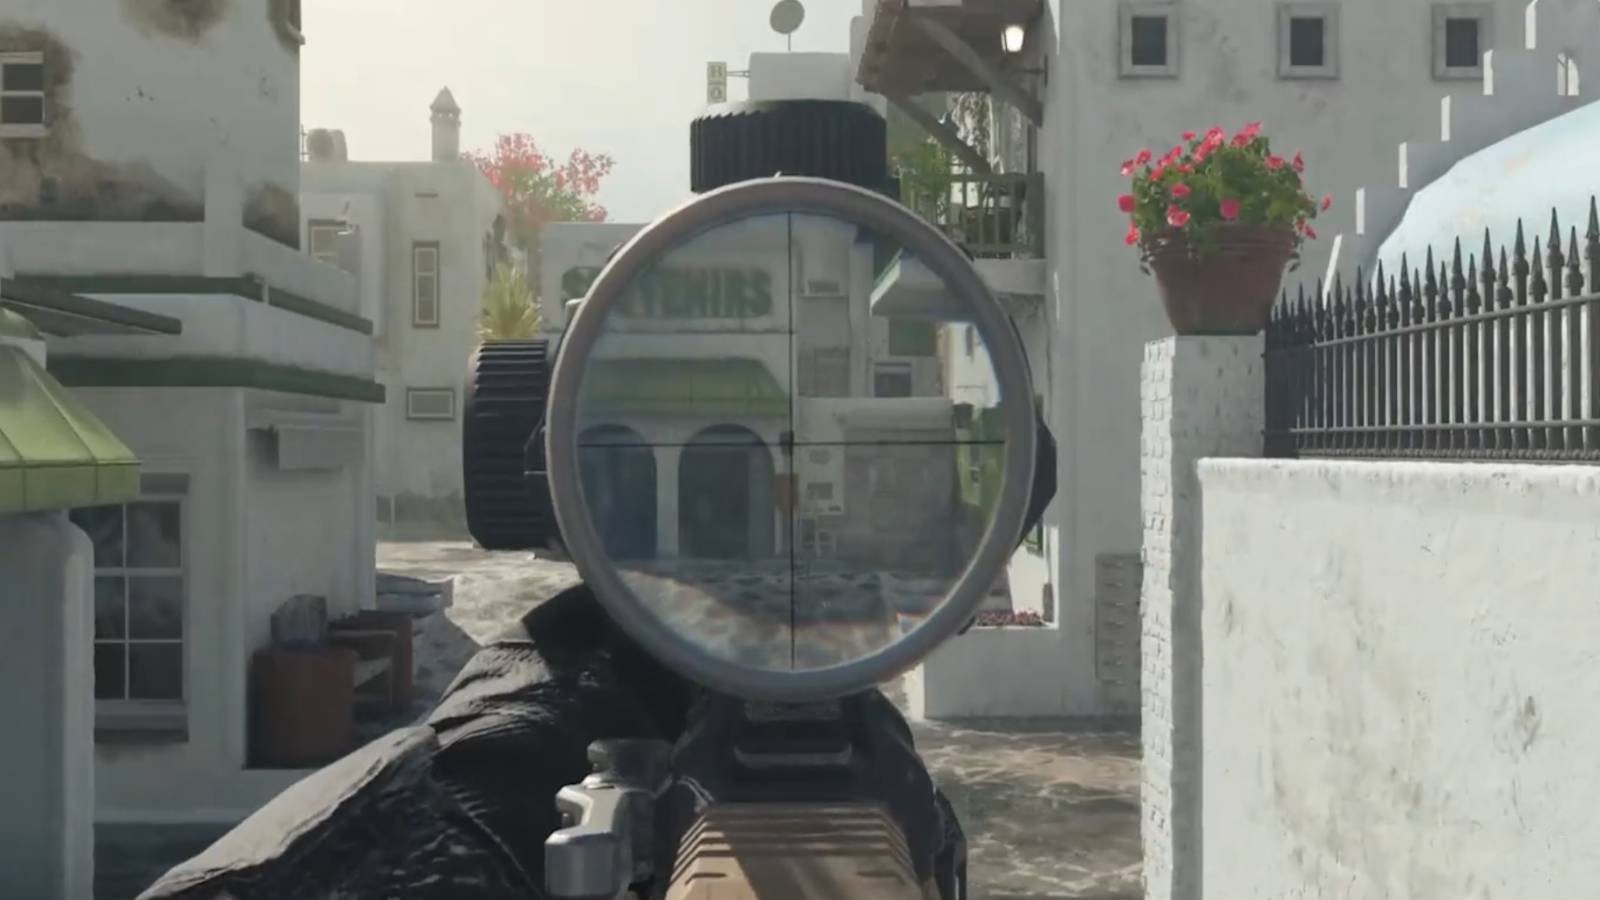 MW3 character aiming down their sights